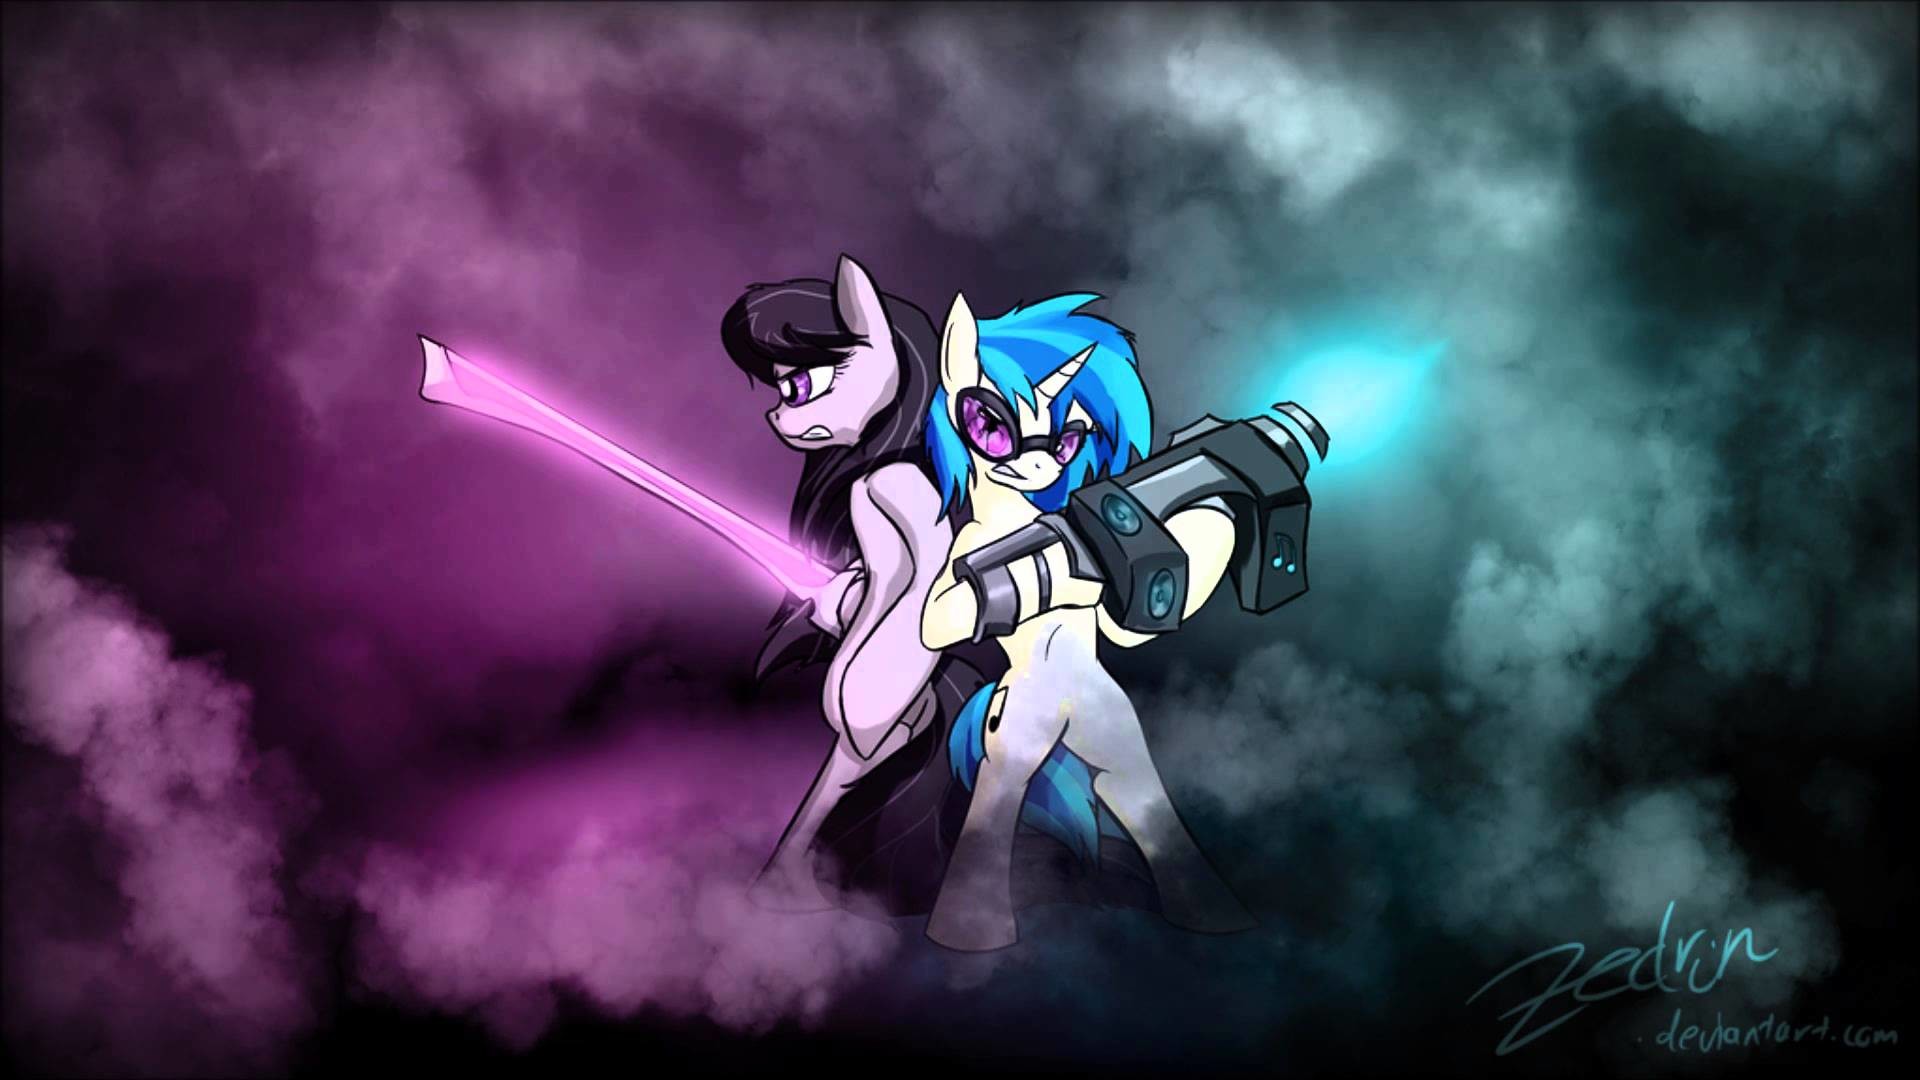 1920x1080 Filename: FUWtdS.jpg Â· view image. Found on: epic-my-little-pony-wallpapers/